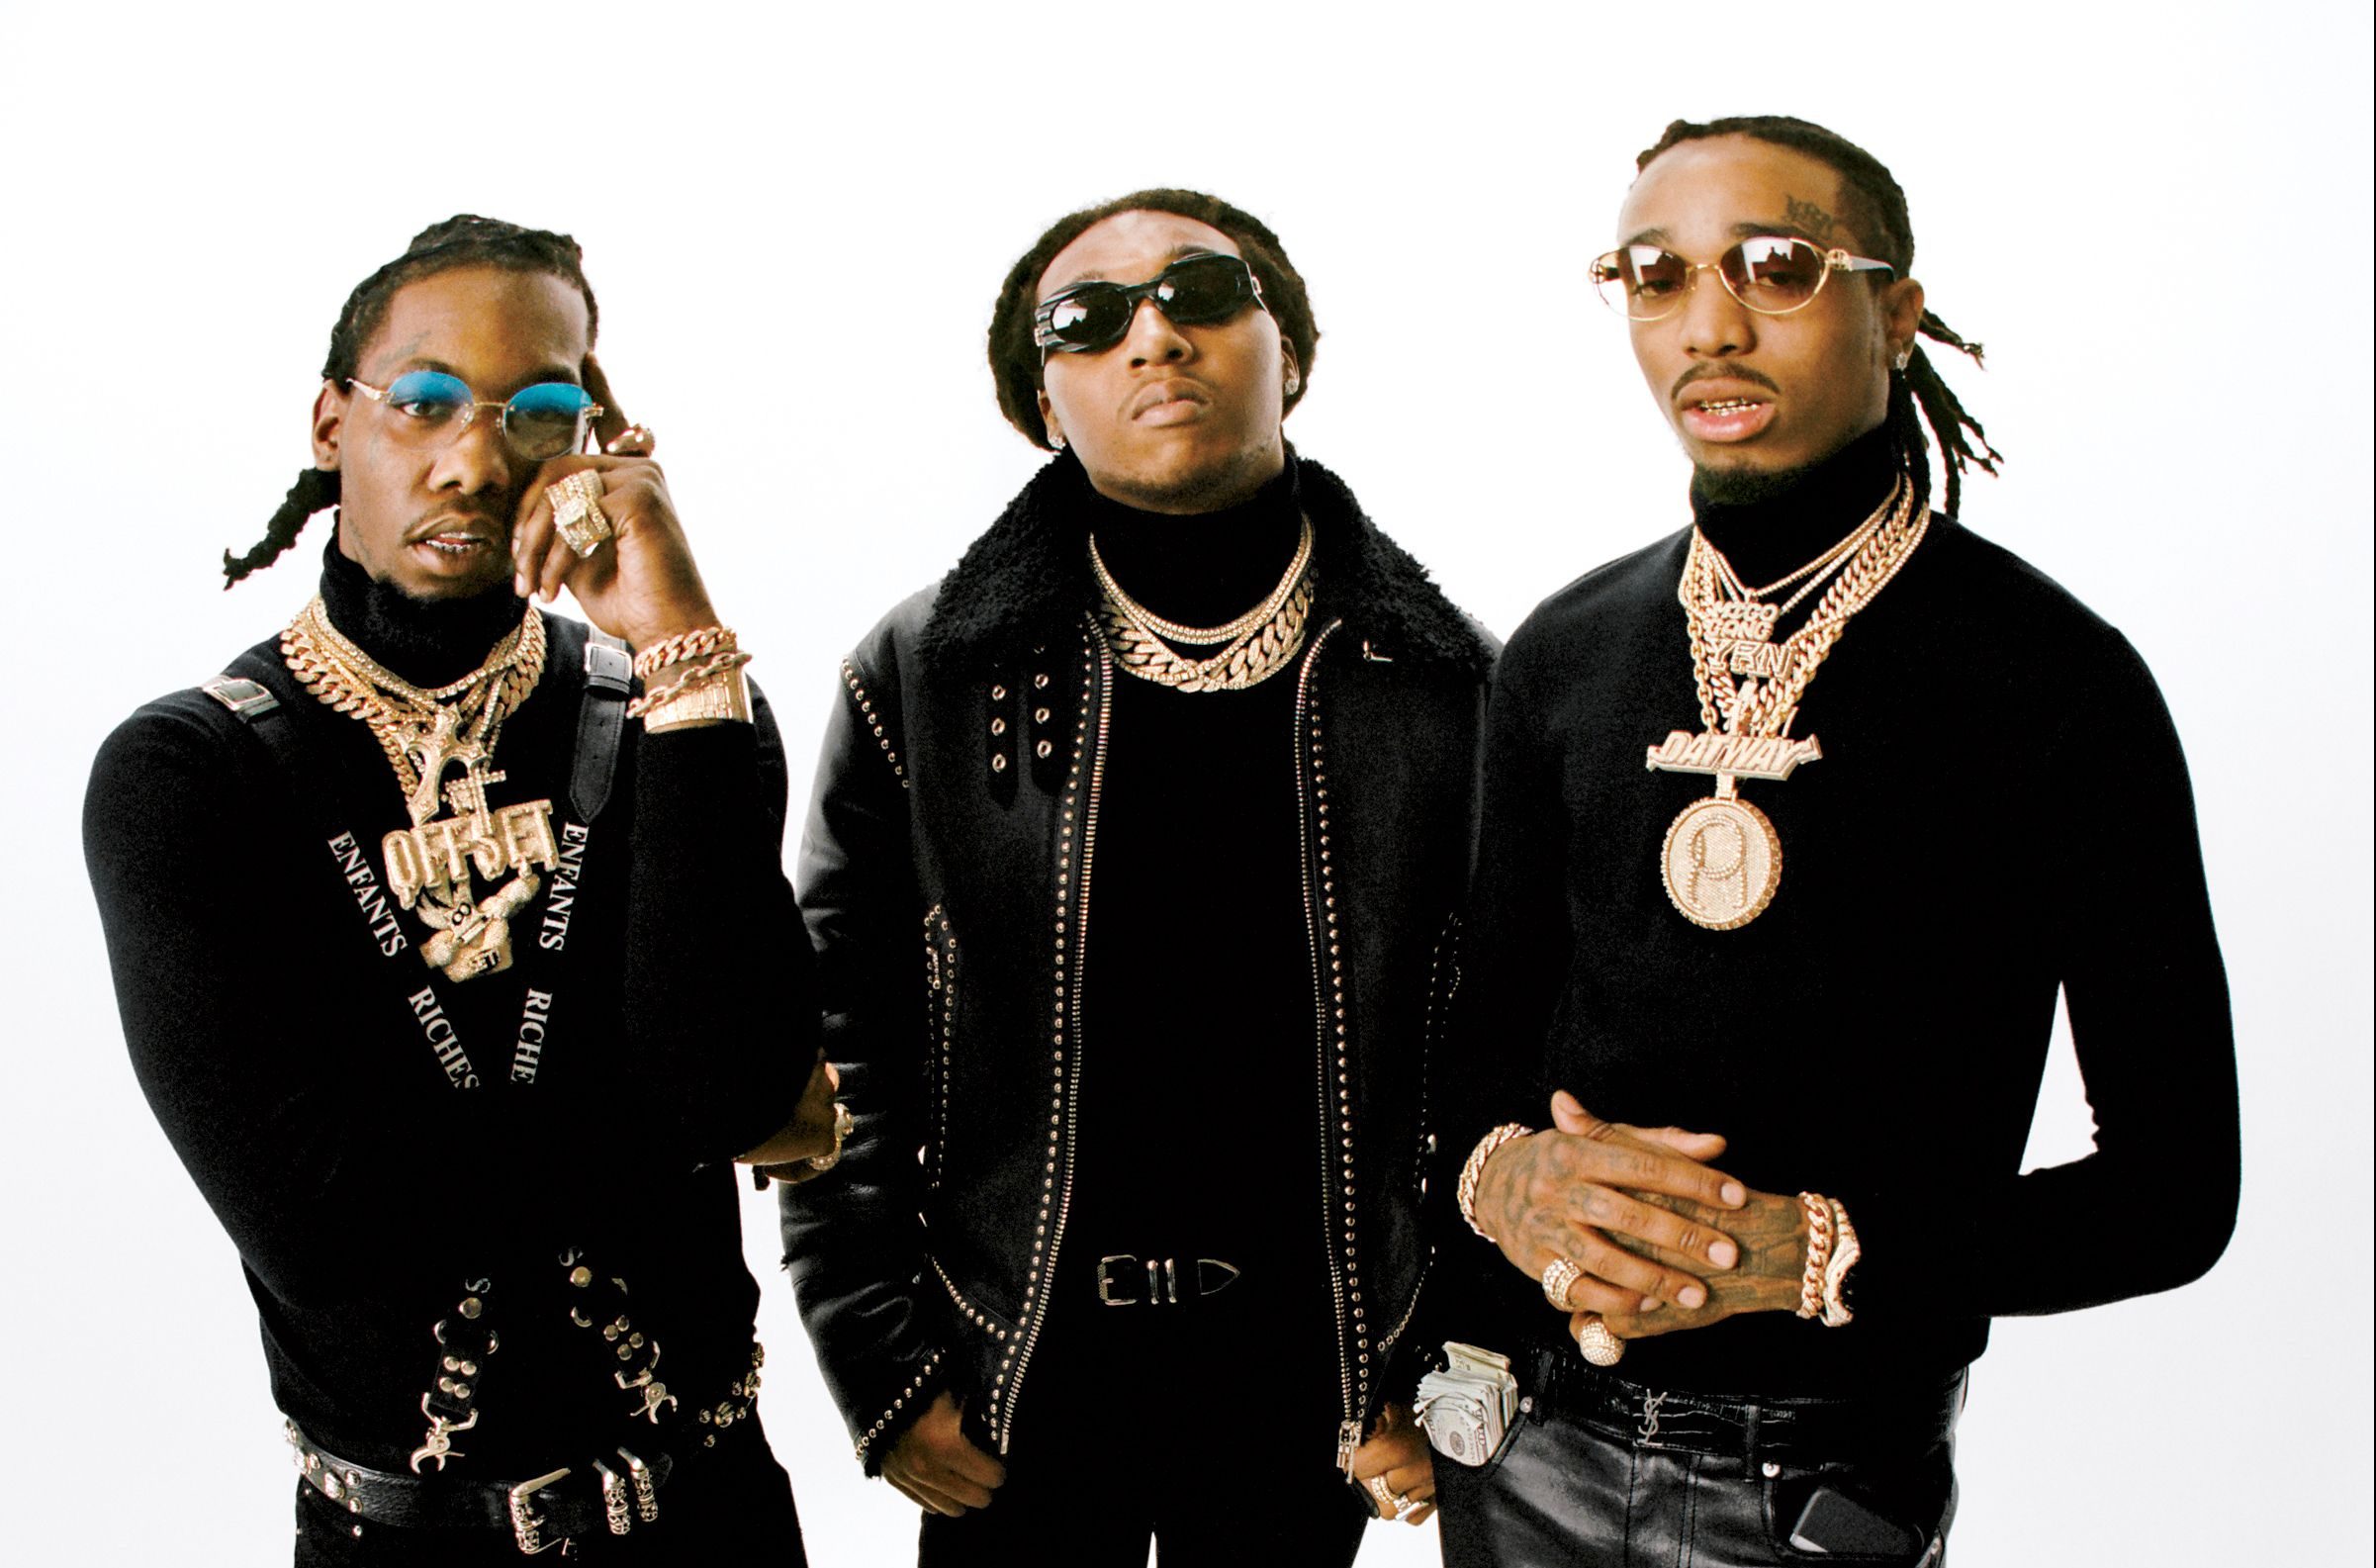 Fans suspect US rap group Migos may have split up